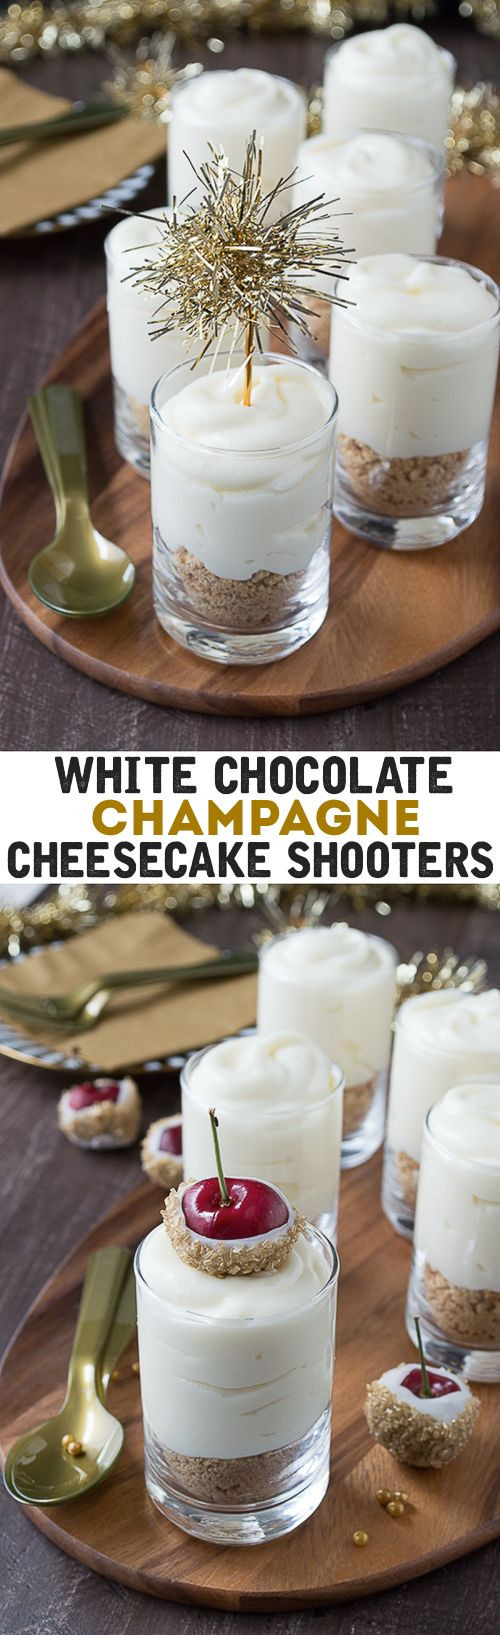 New Years Dessert Recipes
 Make these fancy and easy white chocolate champagne